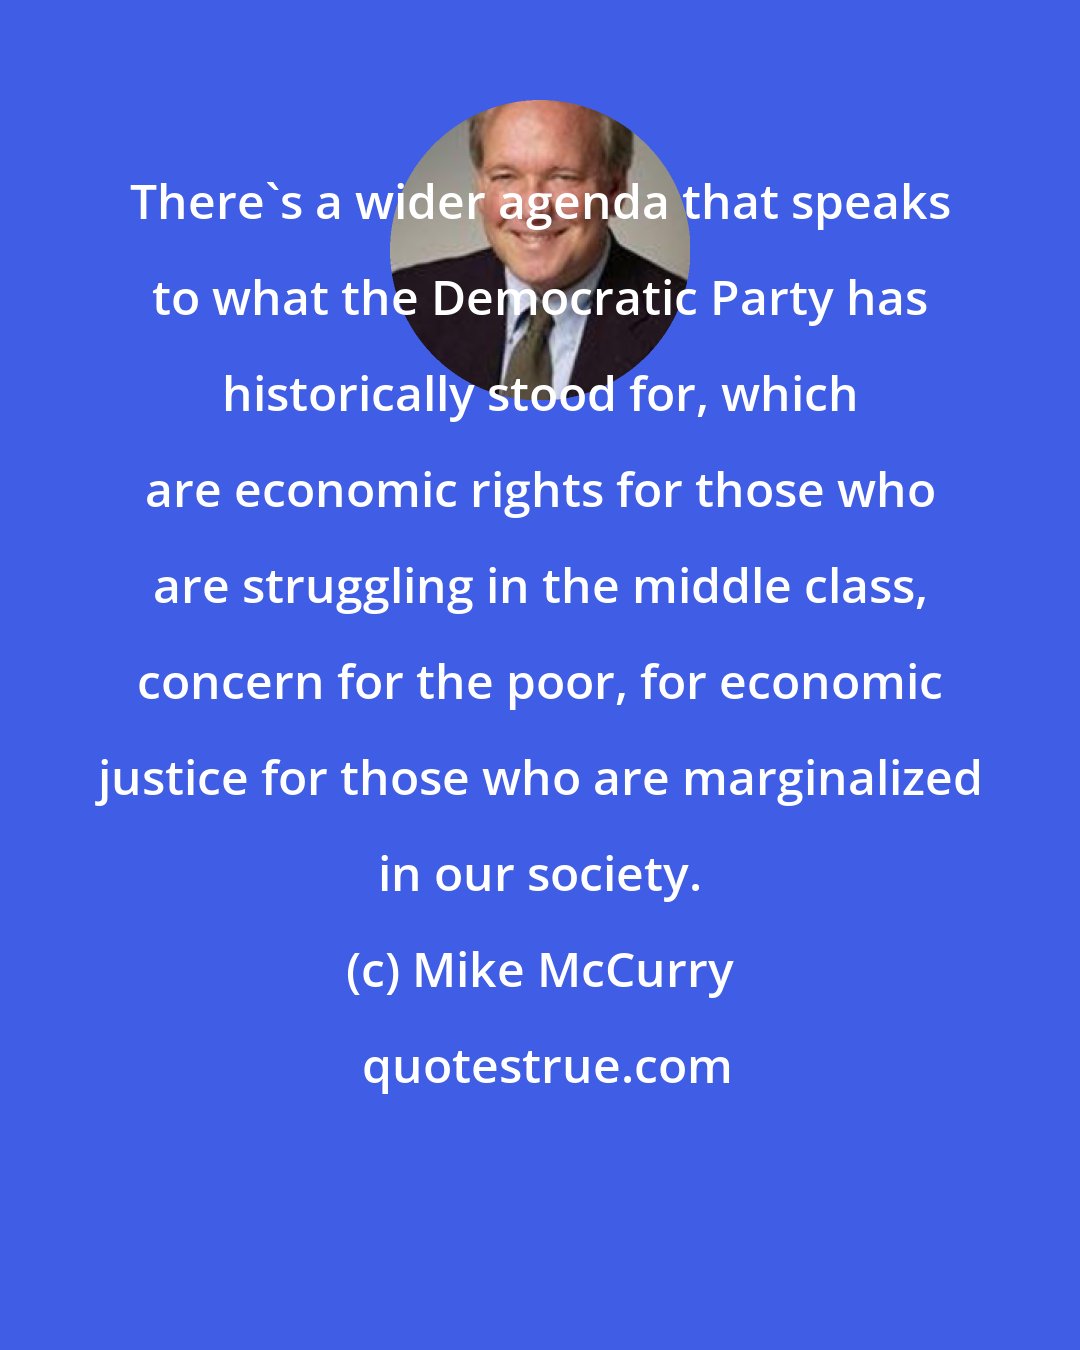 Mike McCurry: There's a wider agenda that speaks to what the Democratic Party has historically stood for, which are economic rights for those who are struggling in the middle class, concern for the poor, for economic justice for those who are marginalized in our society.